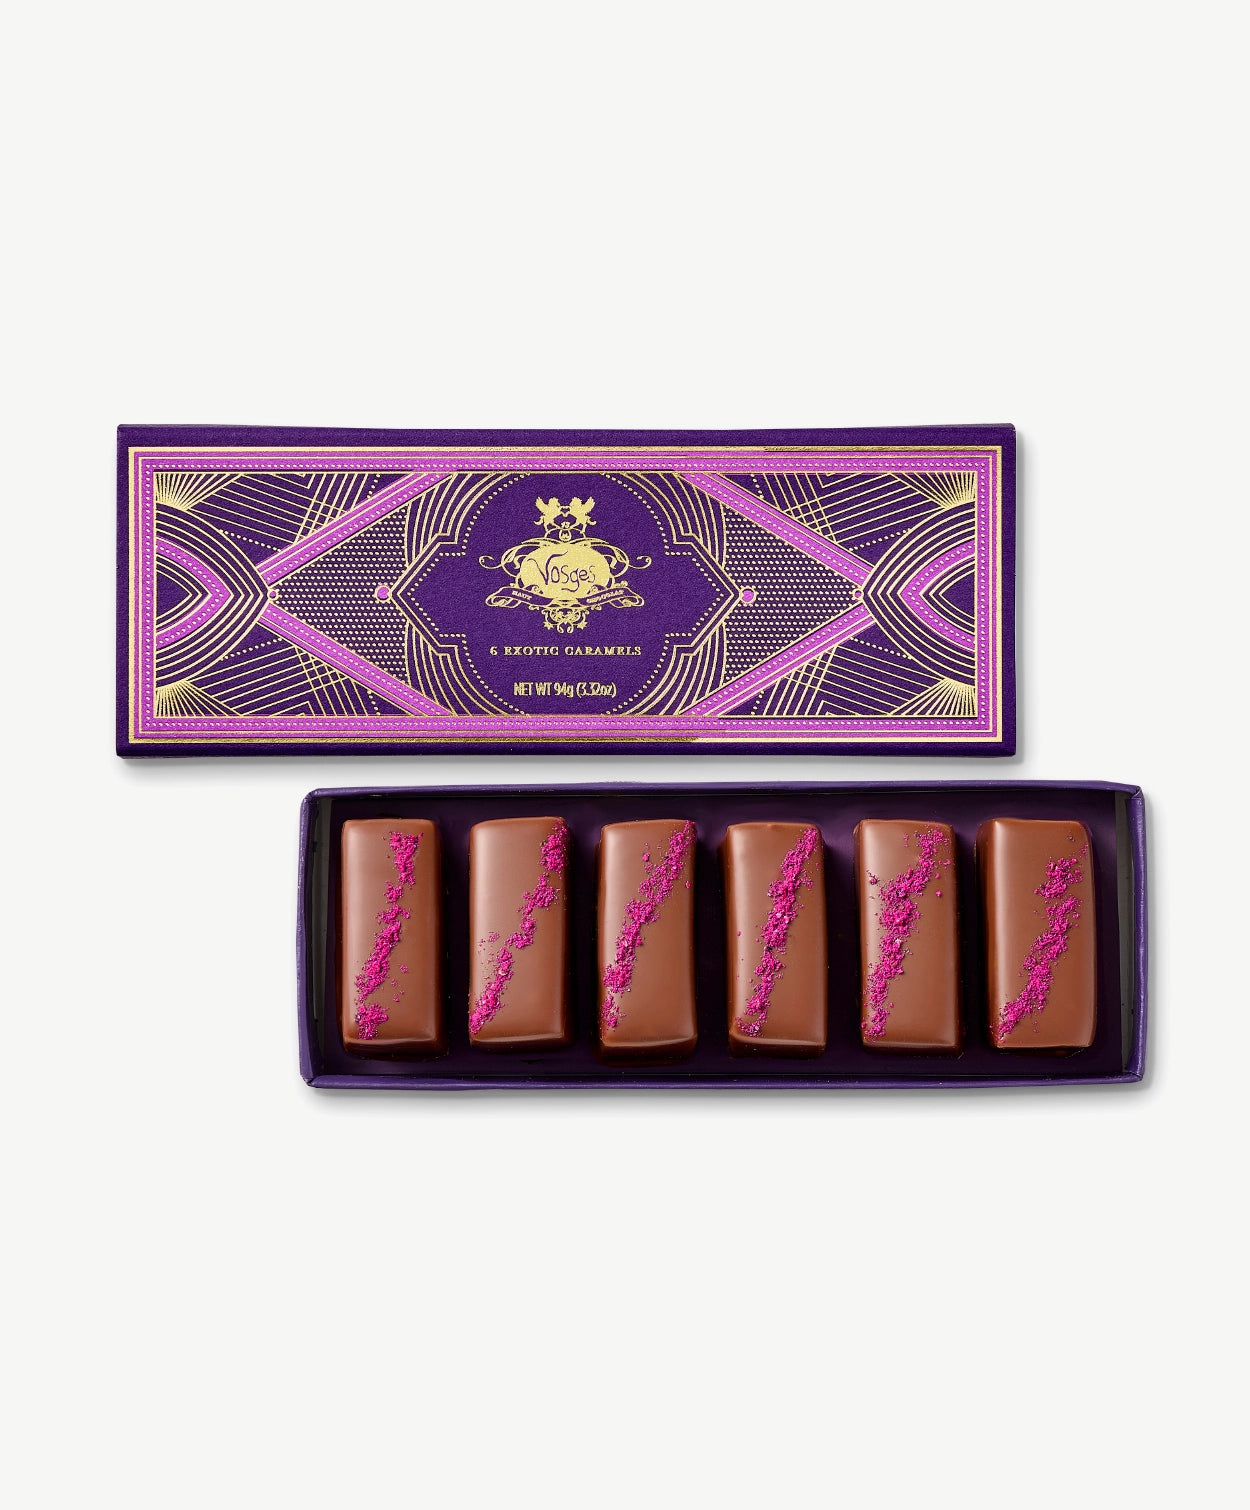 Six chocolate covered Vosges Caramels topped with red Hawaiian sea salt in opened candy box embossed with gold foil on a grey background.